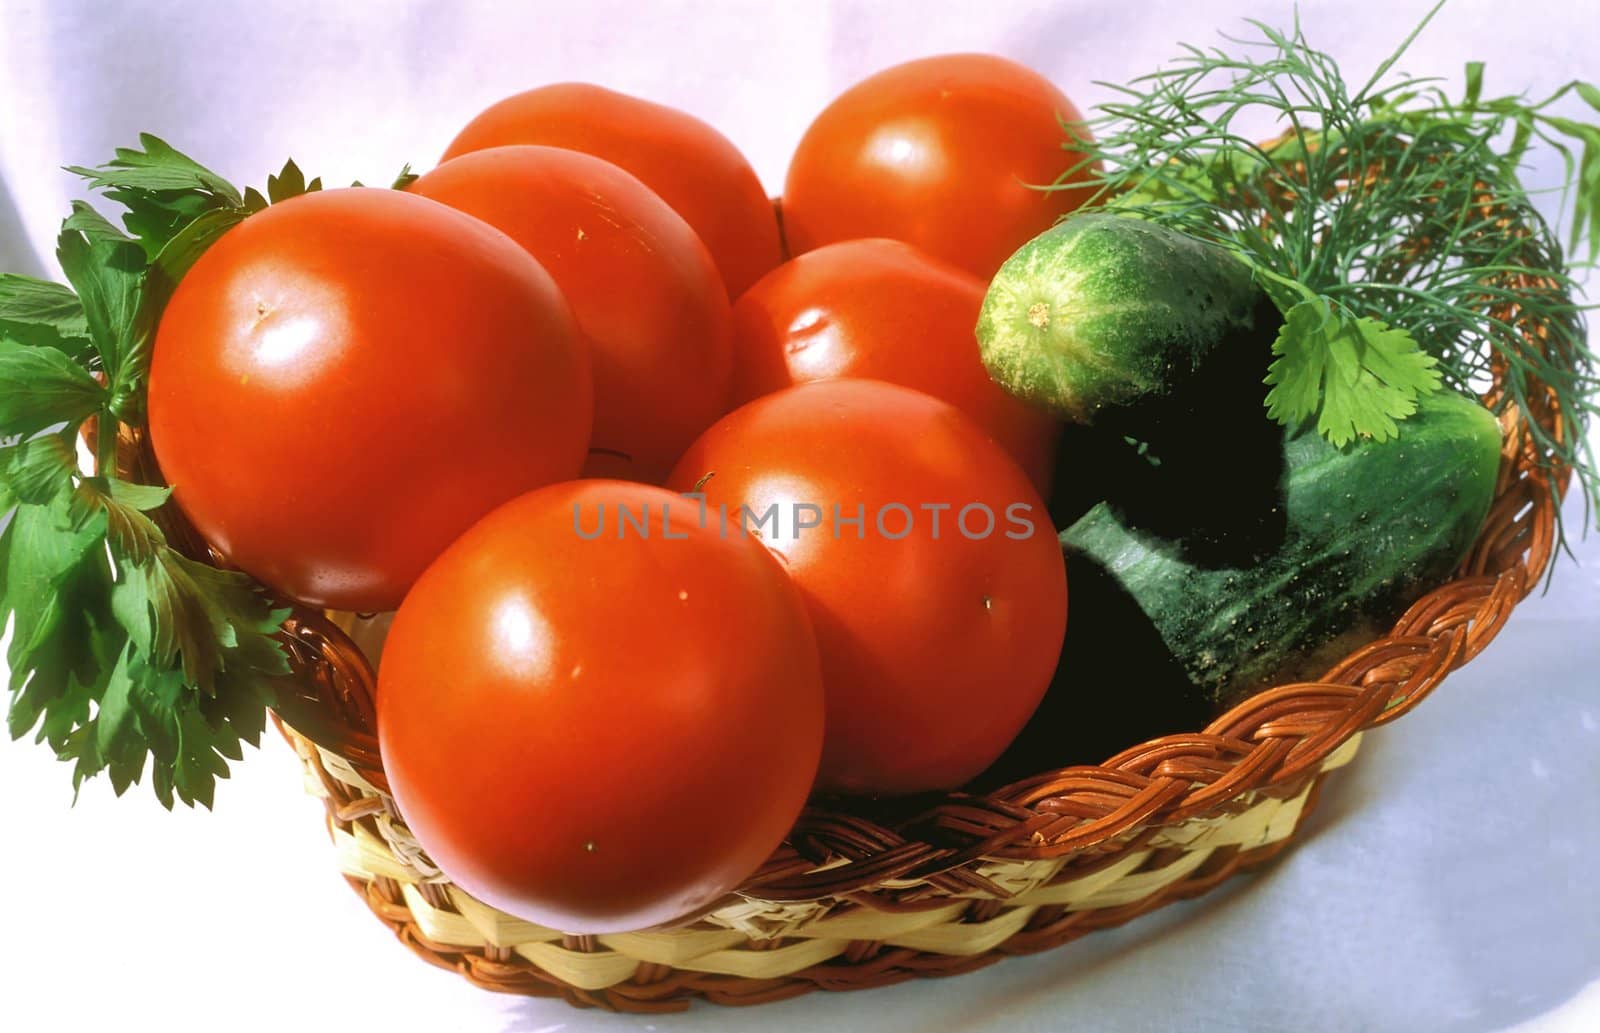 Tomatoes and cucumbers in the basket